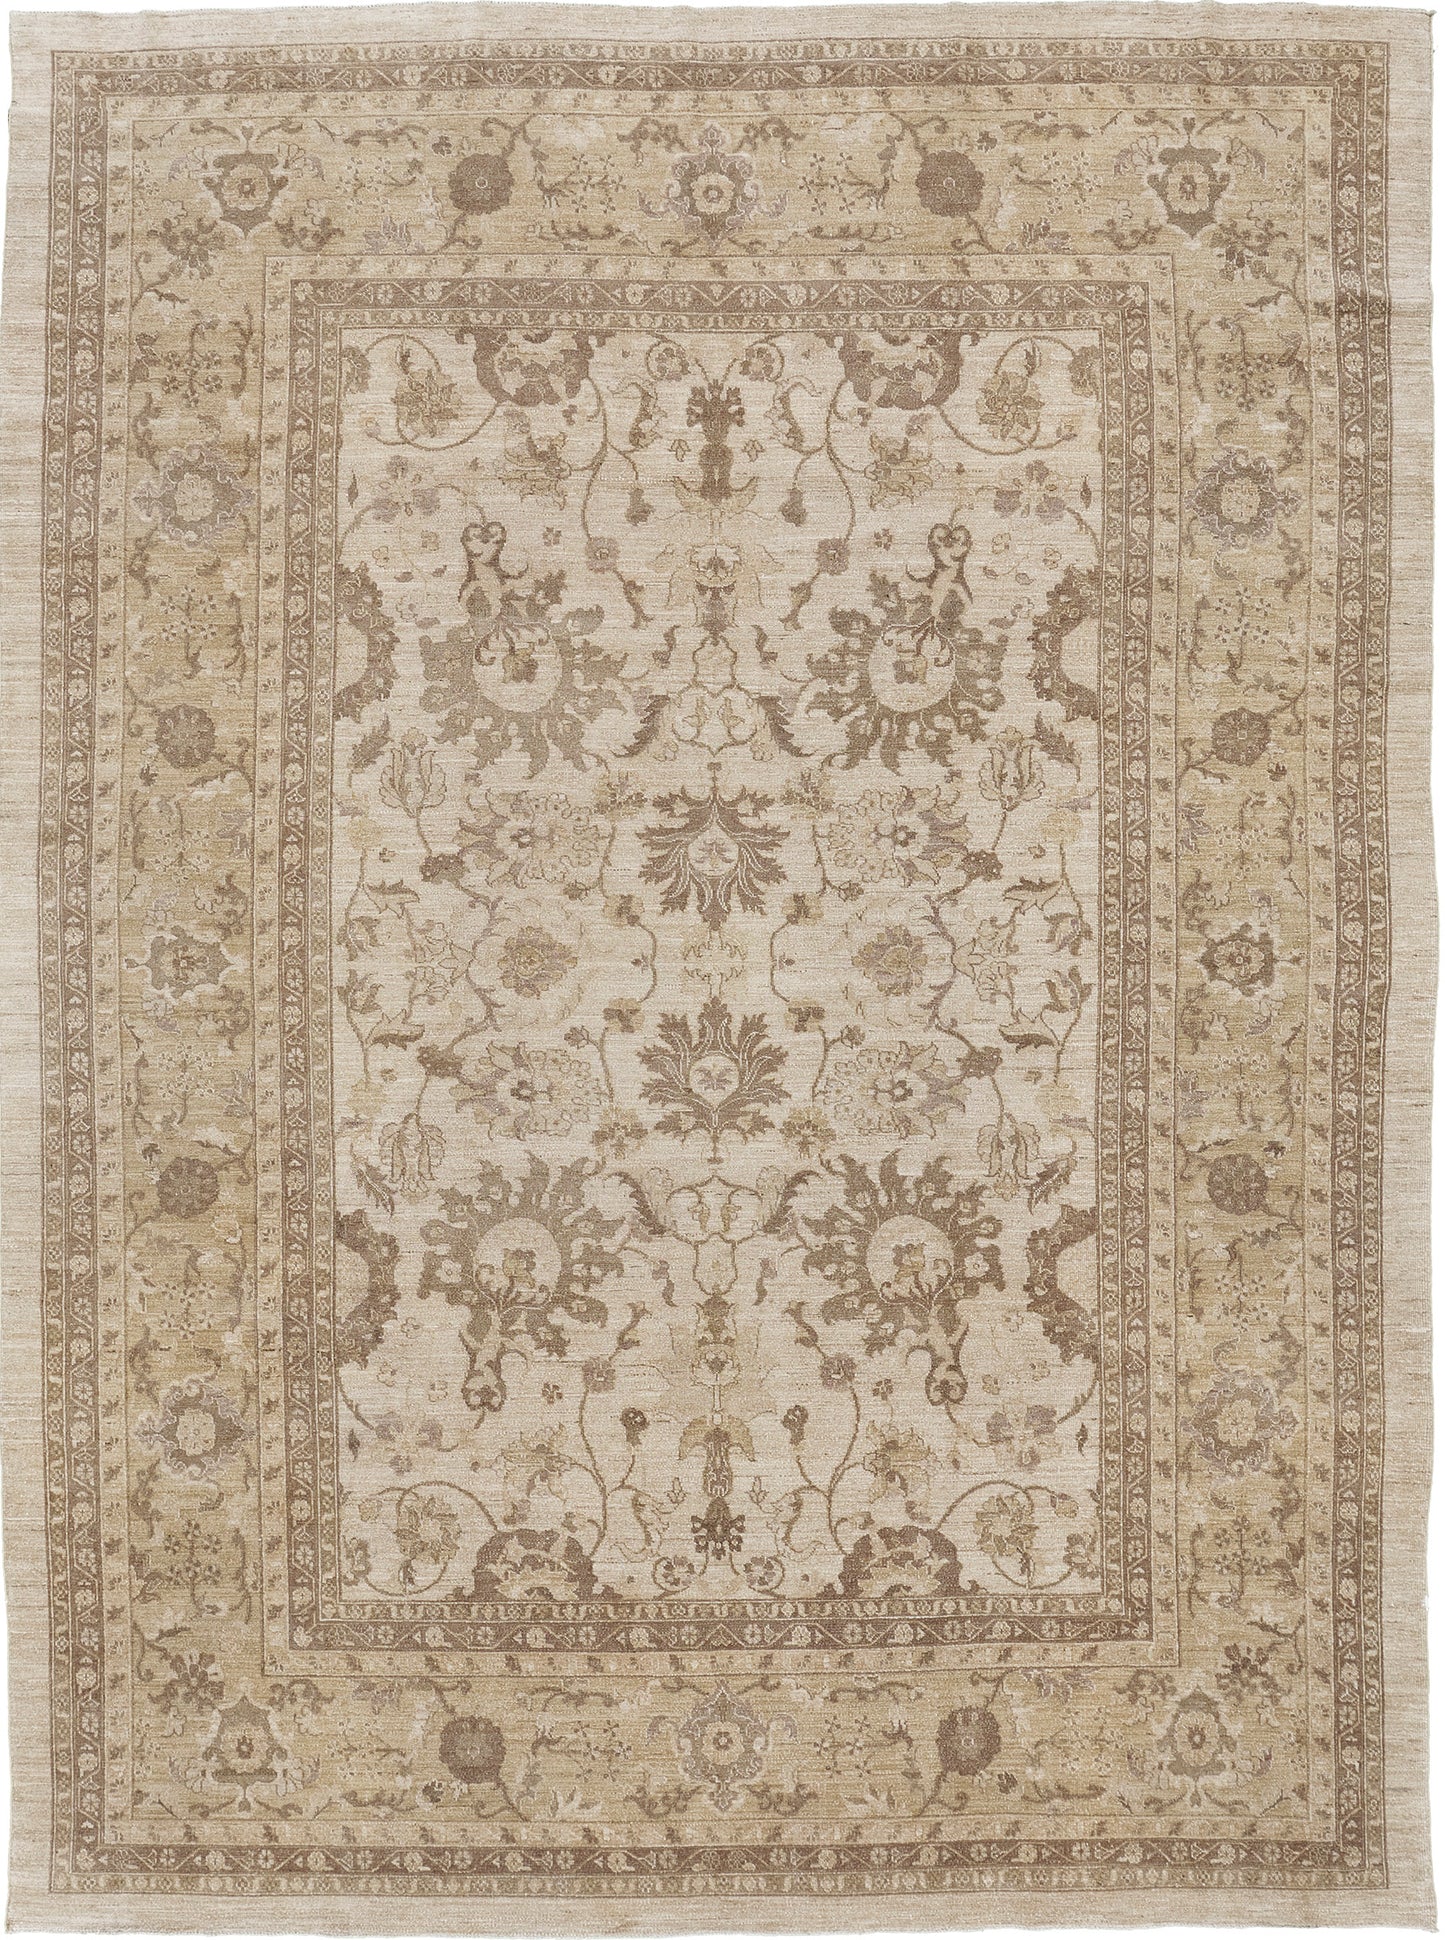 Vintage Sultanabad Style Rug D256